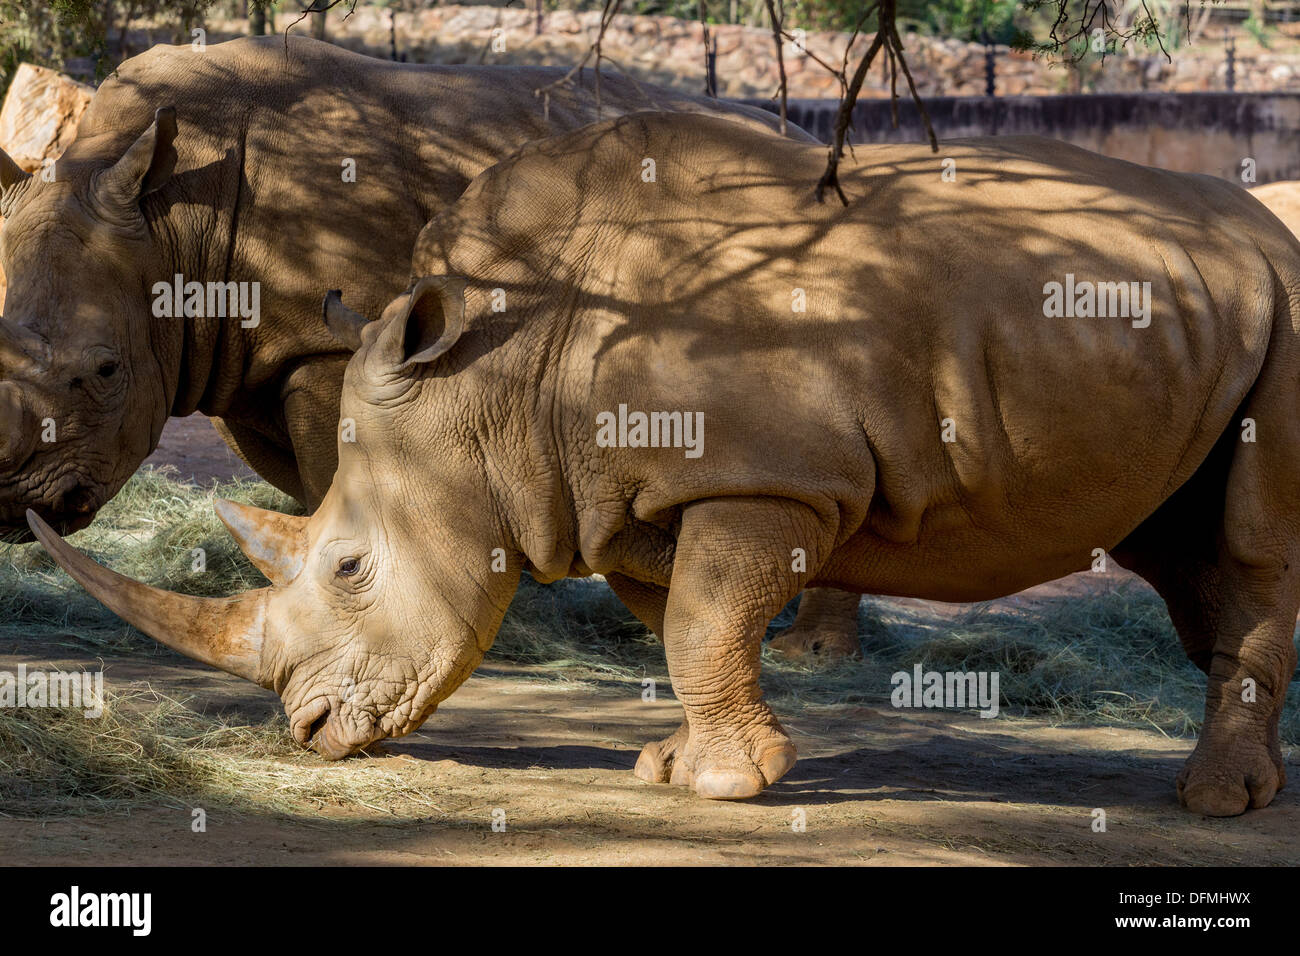 Two large adult rhinos with large horns eating dry hay Stock Photo